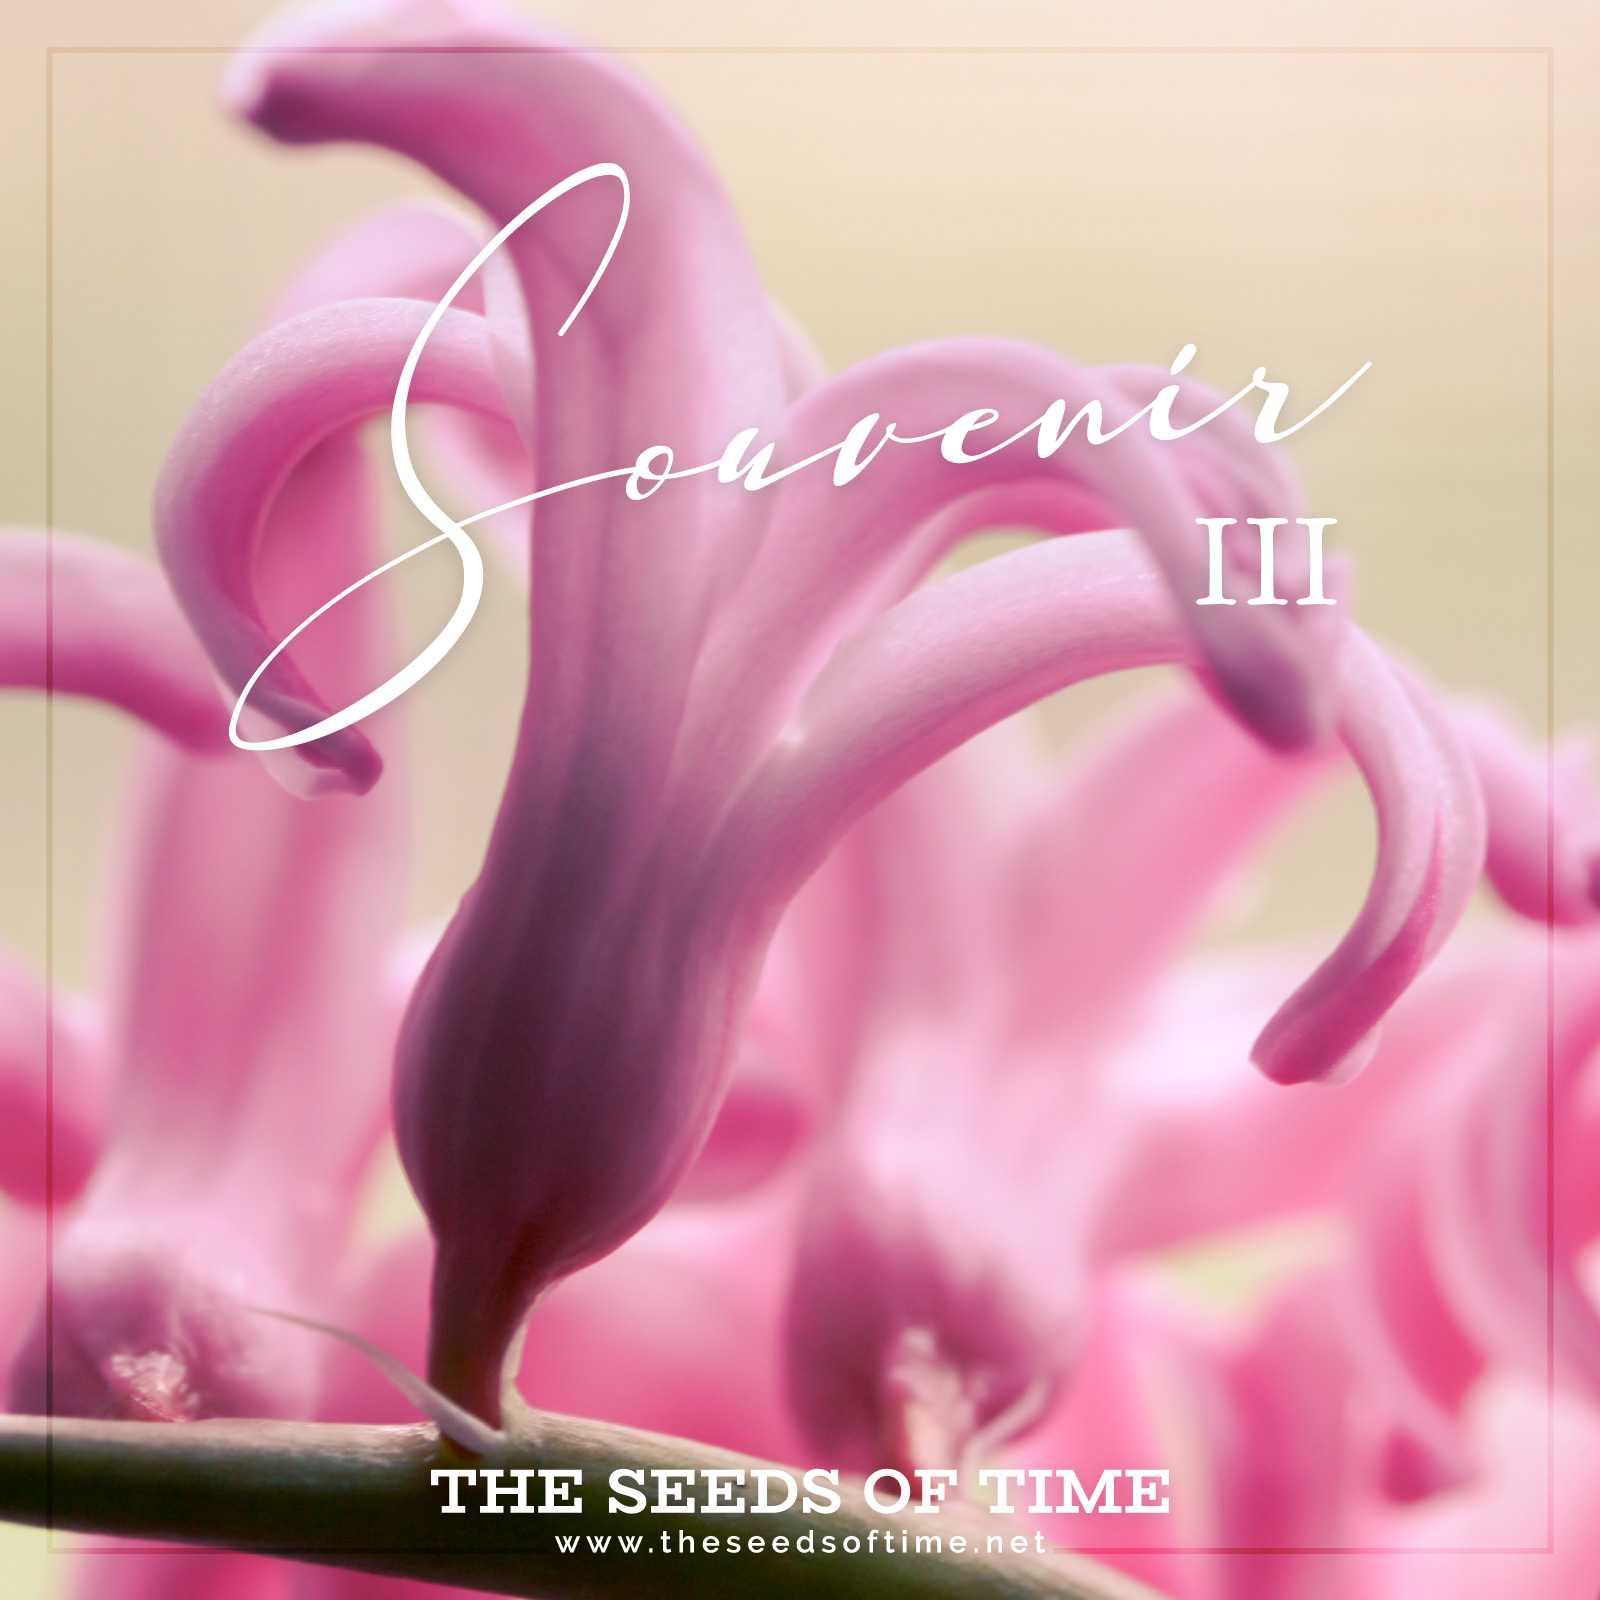 Track image for experimental ambient piece titled Souvenir 3 showing a beautiful photograph of pink Orchid flowers reaching out with their softest touch into the heavens